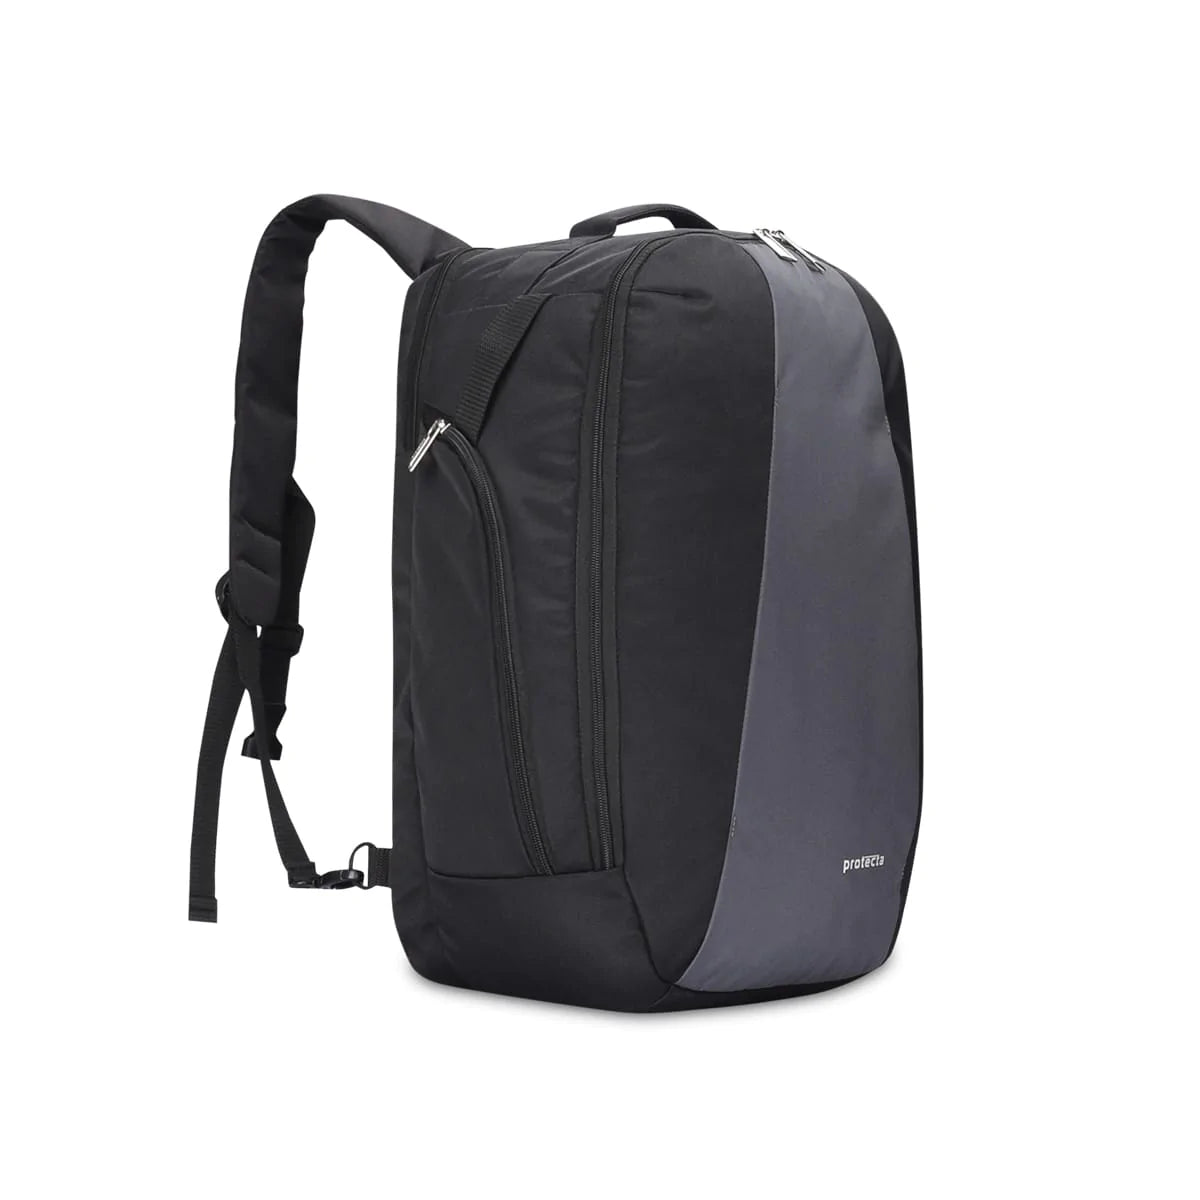 Black-Grey | Protecta Proposed Merger Convertible Office Trave Laptop Backpack-Main